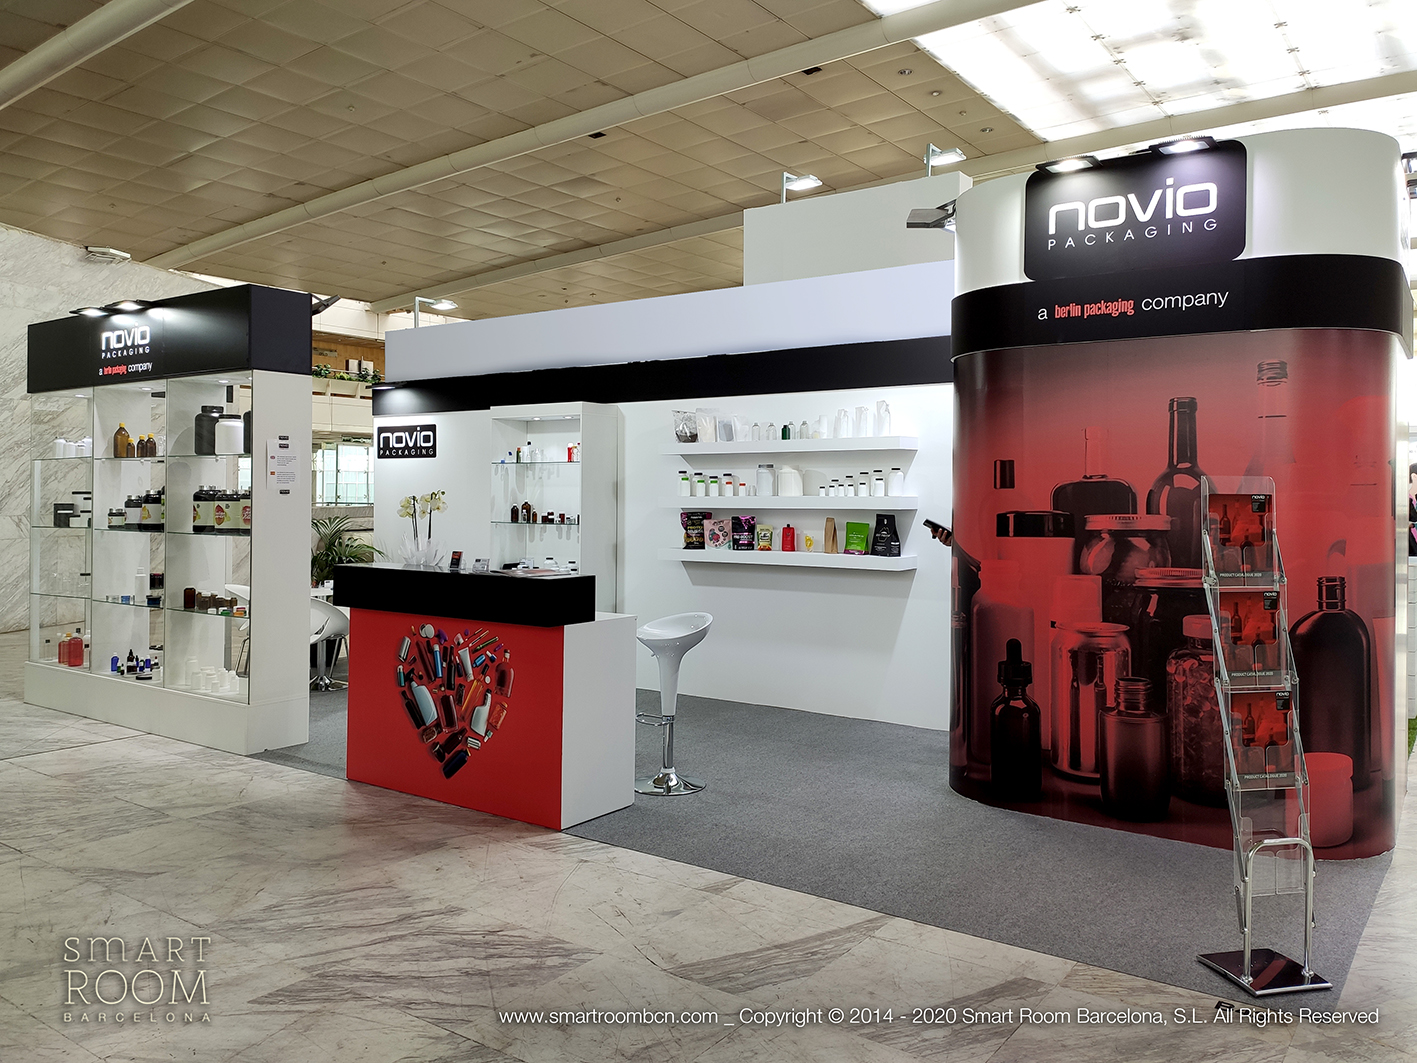 Stand for Novio Packaging at Nutraceuticals Europe